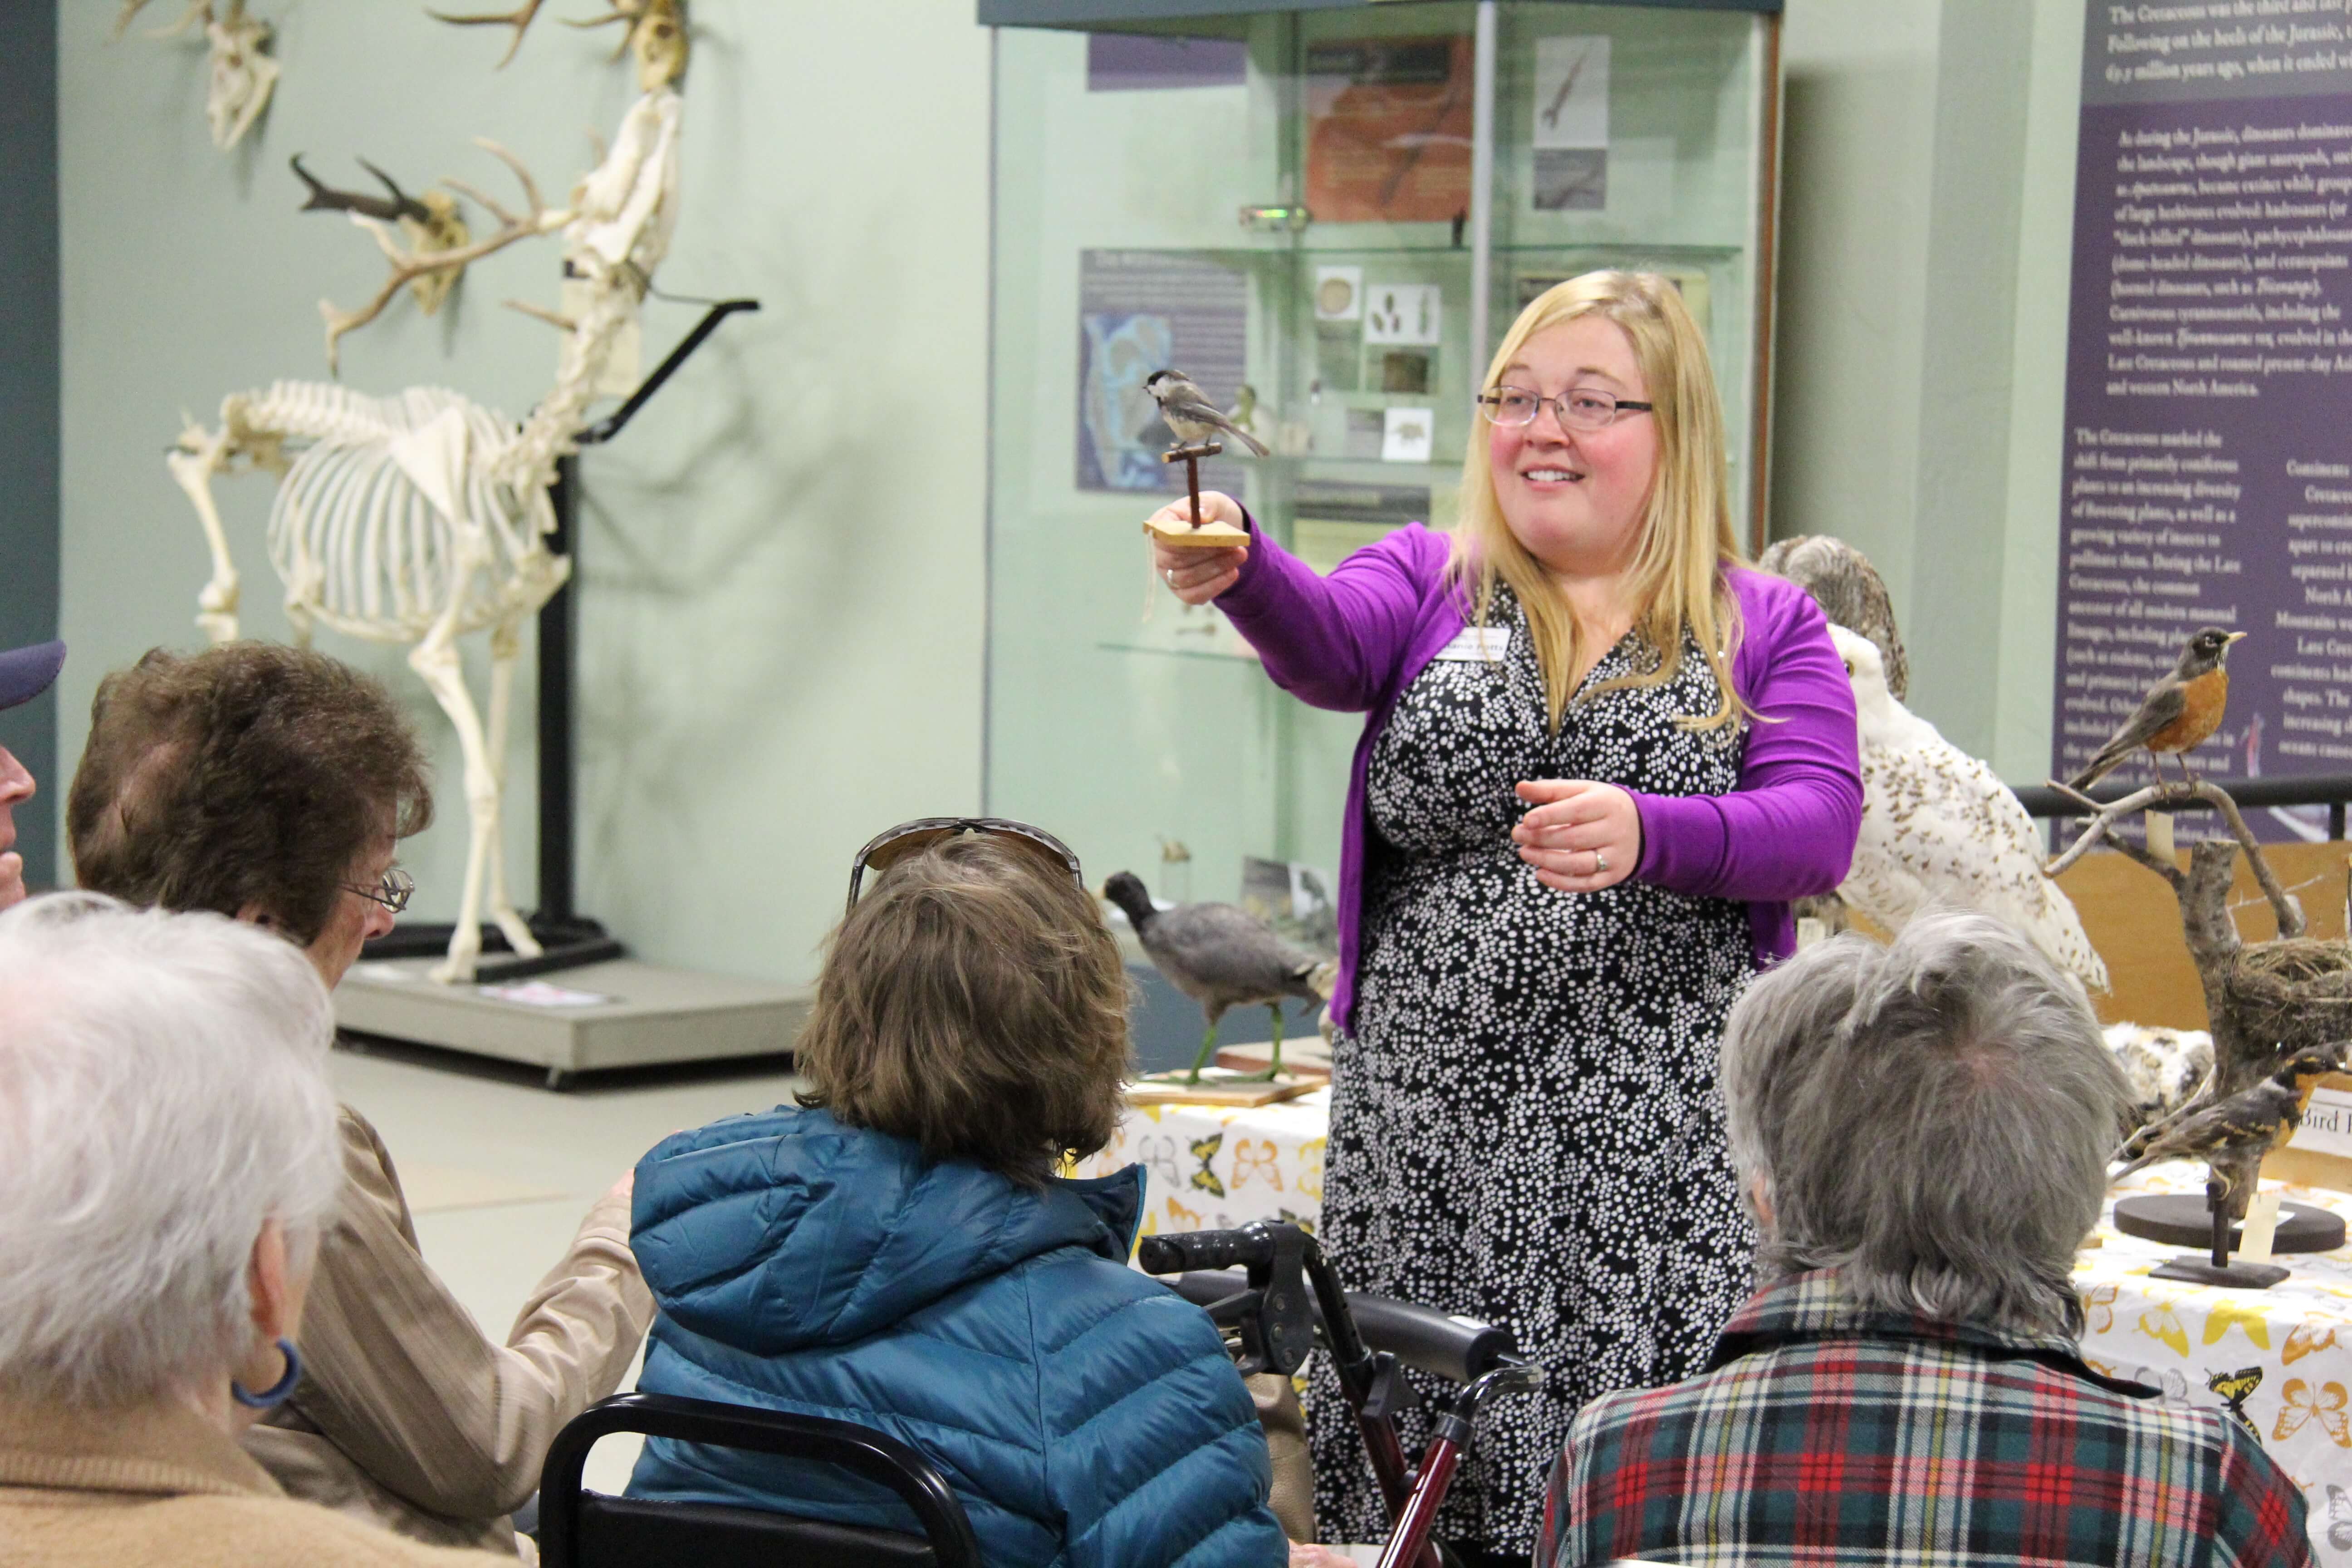 Stephanie Potts leads a Museum Tour for seniors at the Montana Natural History Center